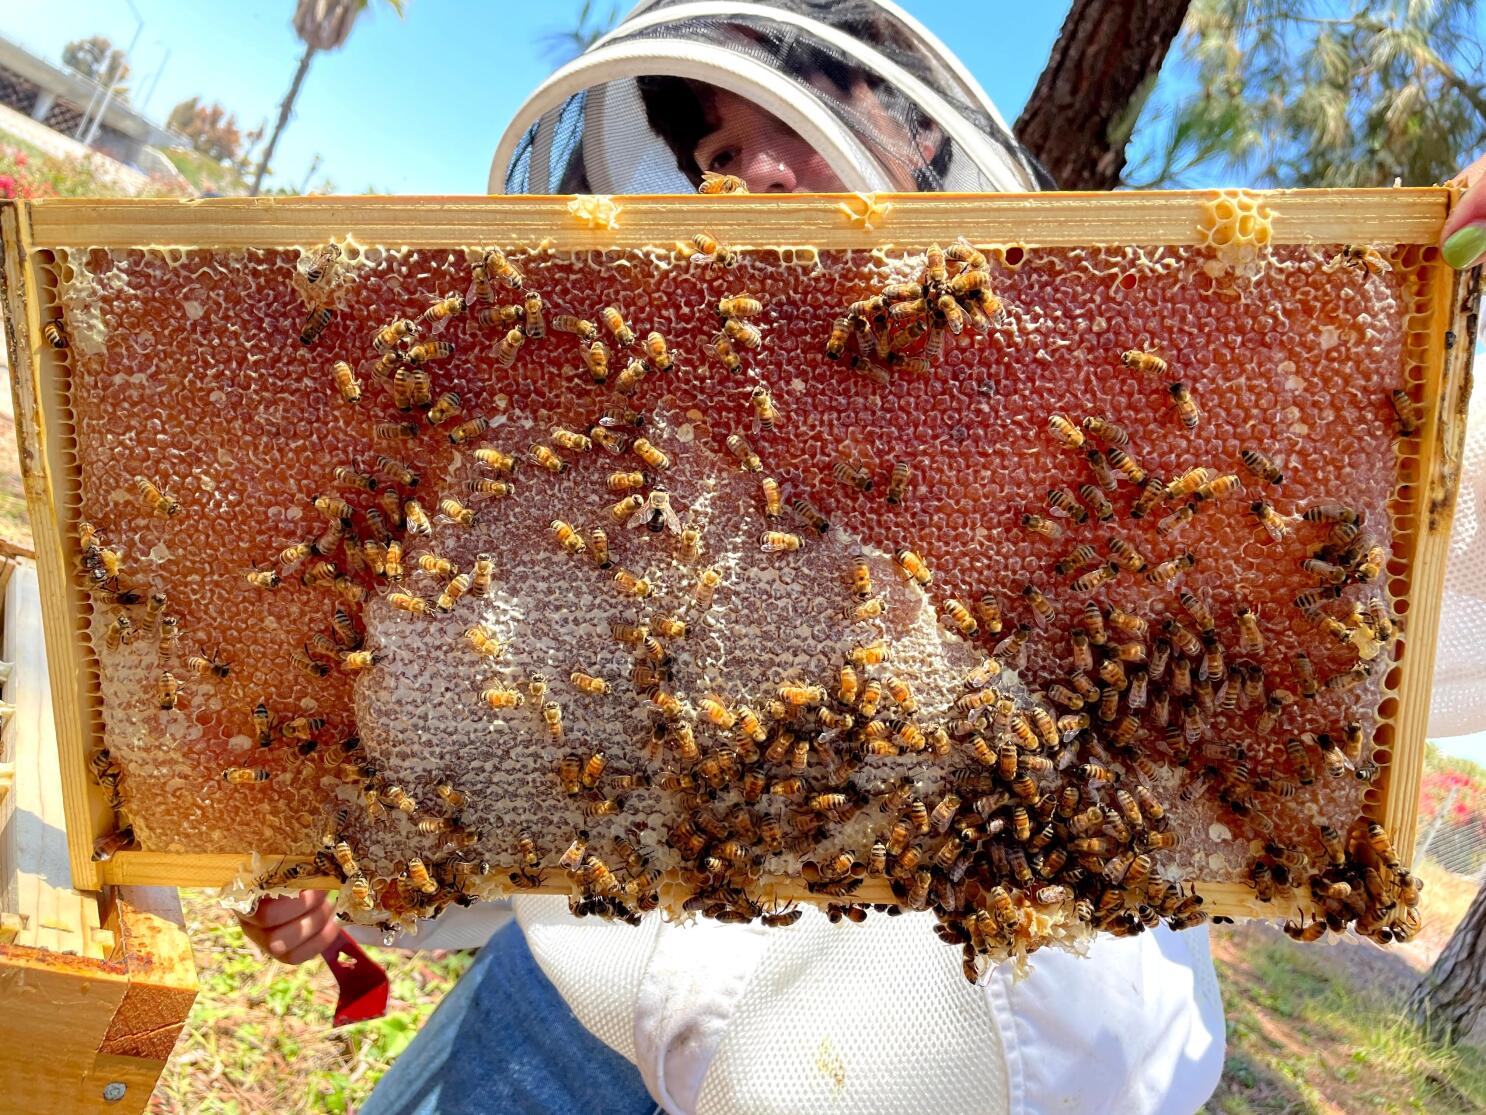 Attracted by growing buzz over urban beekeeping, Costa Mesa tenants  becoming eco-minded - Los Angeles Times